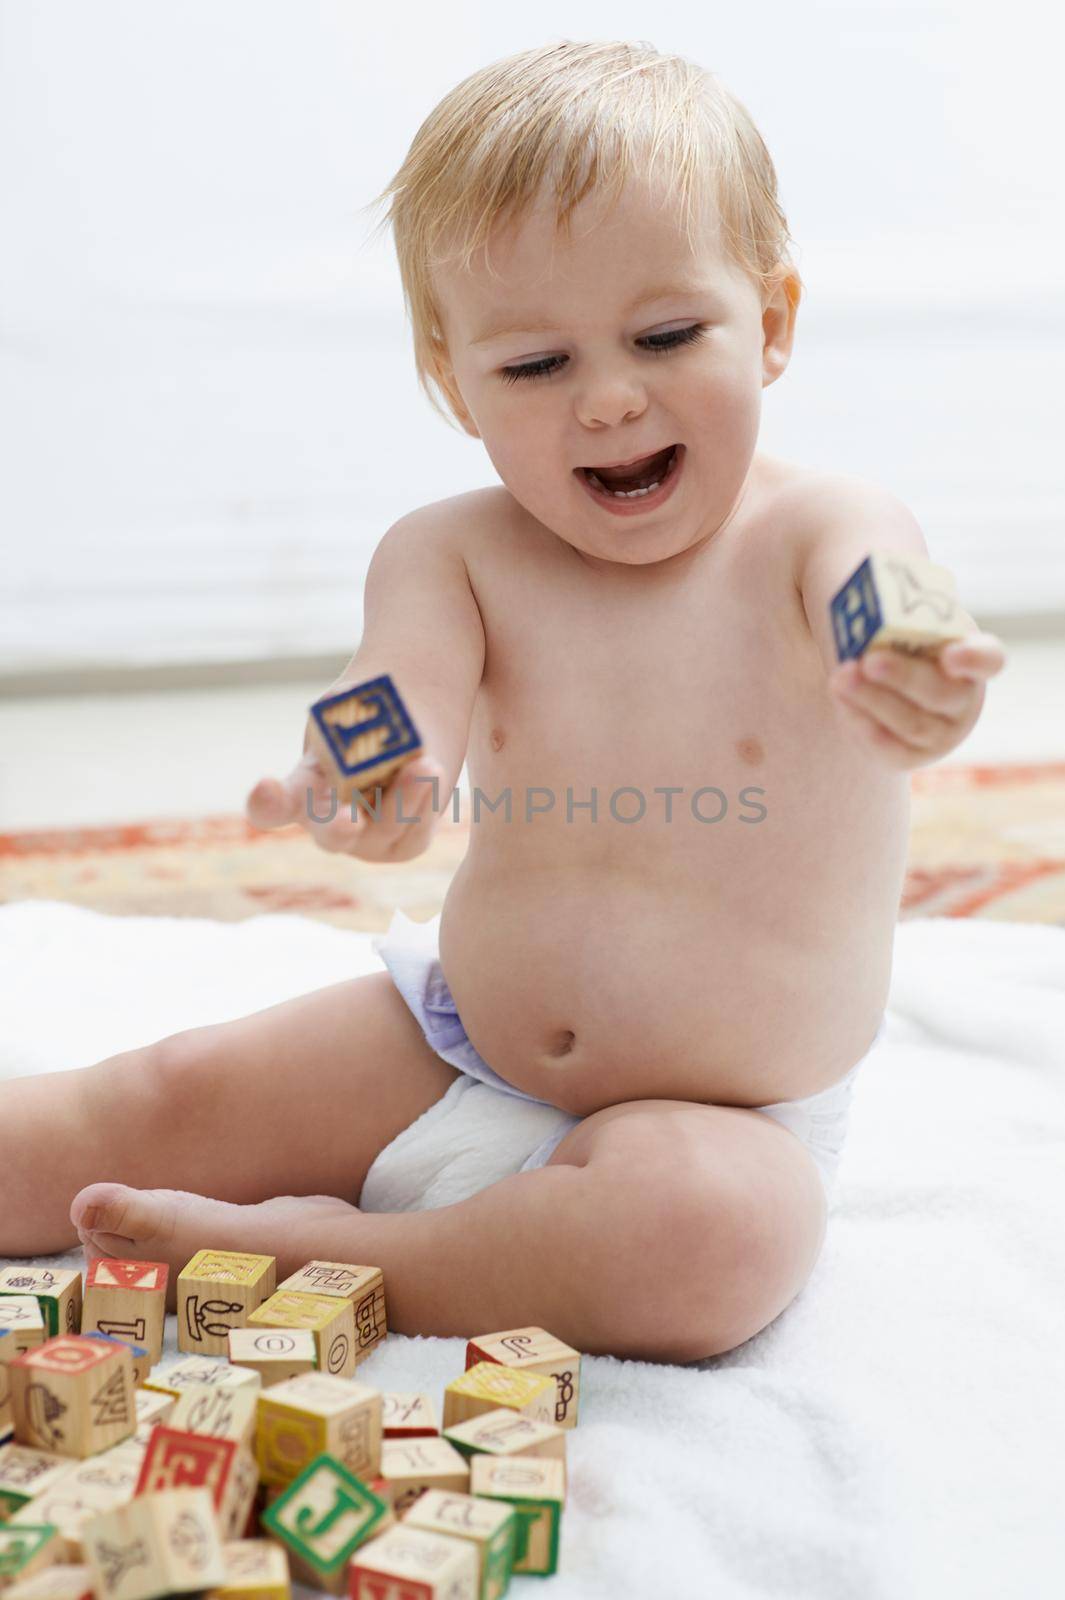 Showing interest in educational games. A baby playing with his building blocks looking content